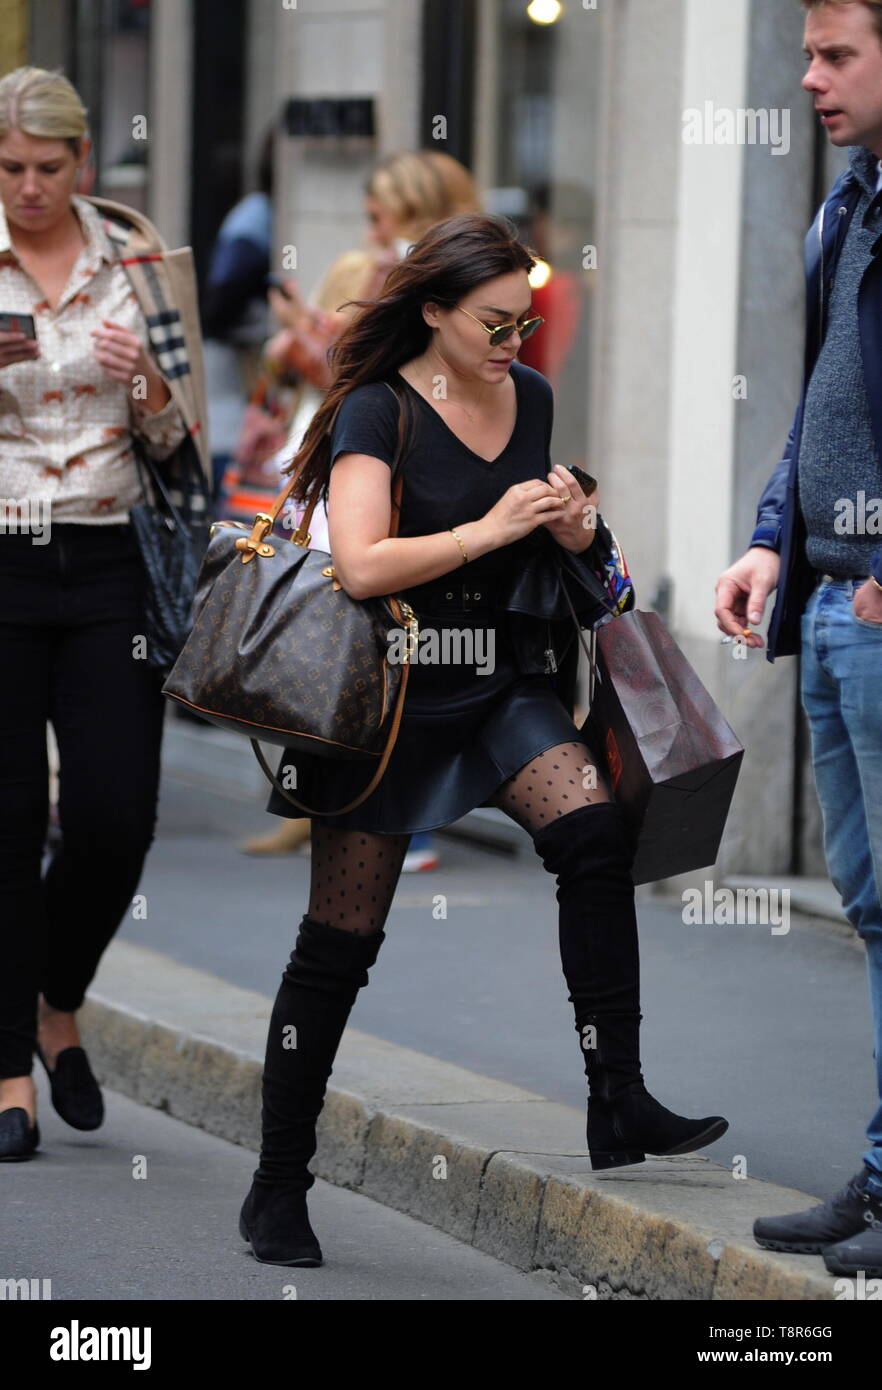 Actress Romina Carrisi-Power, daughter of Albano Carrisi and Romina Power, walks through the streets of the city center while shopping with a friend  Featuring: Romina Carrisi-Power Where: Milan, Italy When: 13 Apr 2019 Credit: IPA/WENN.com  **Only available for publication in UK, USA, Germany, Austria, Switzerland** Stock Photo